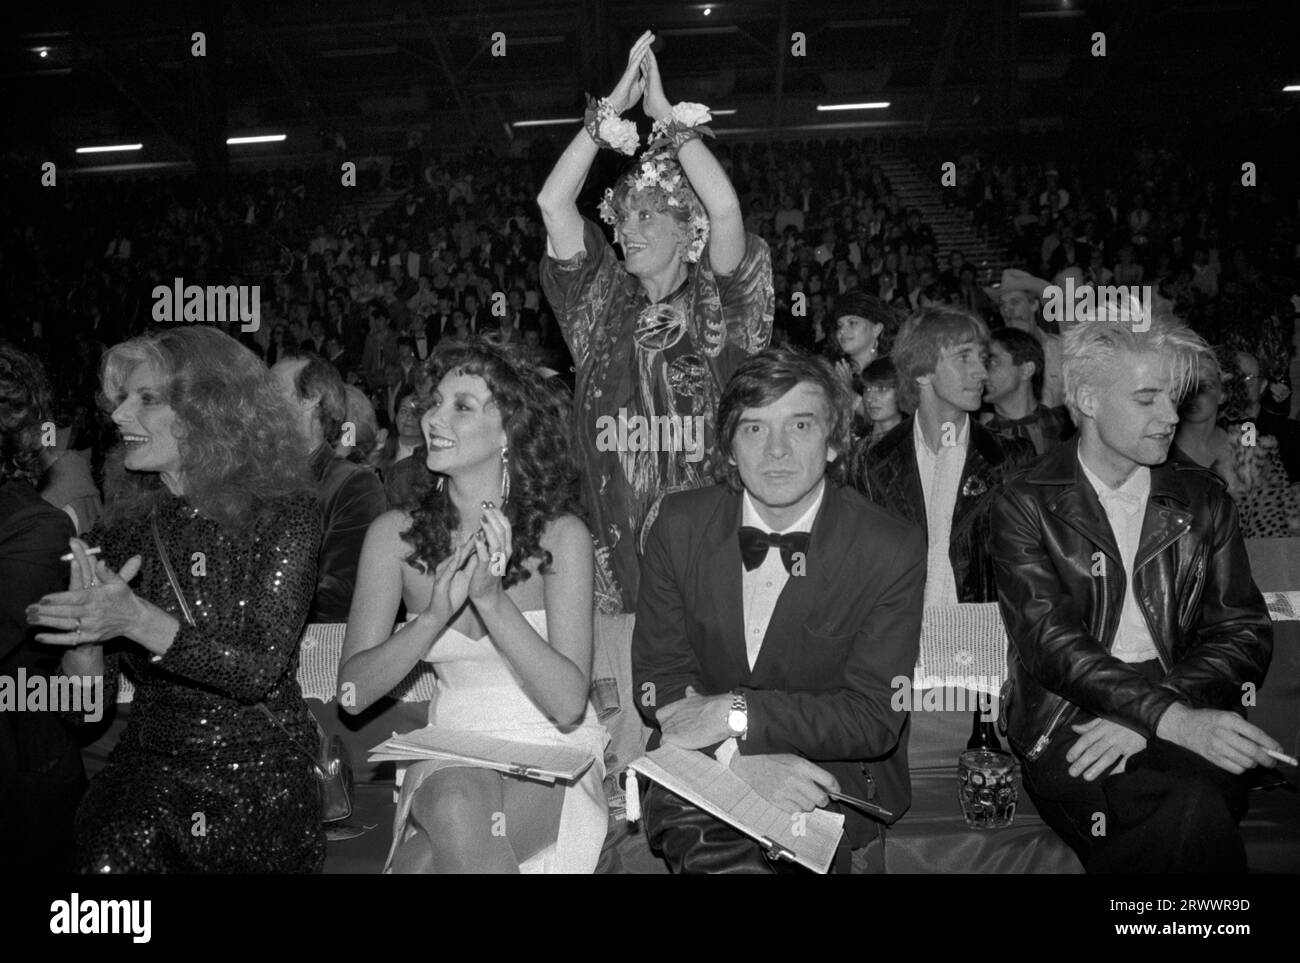 David Bailey, Marie Helvin, Rula Lenska three of the judges at the Alternative Miss World Competition 1980s UK. Nick Rhodes of Duran Duran (extreme right next to DB) West London England 1981 UK HOMER SYKES Stock Photo